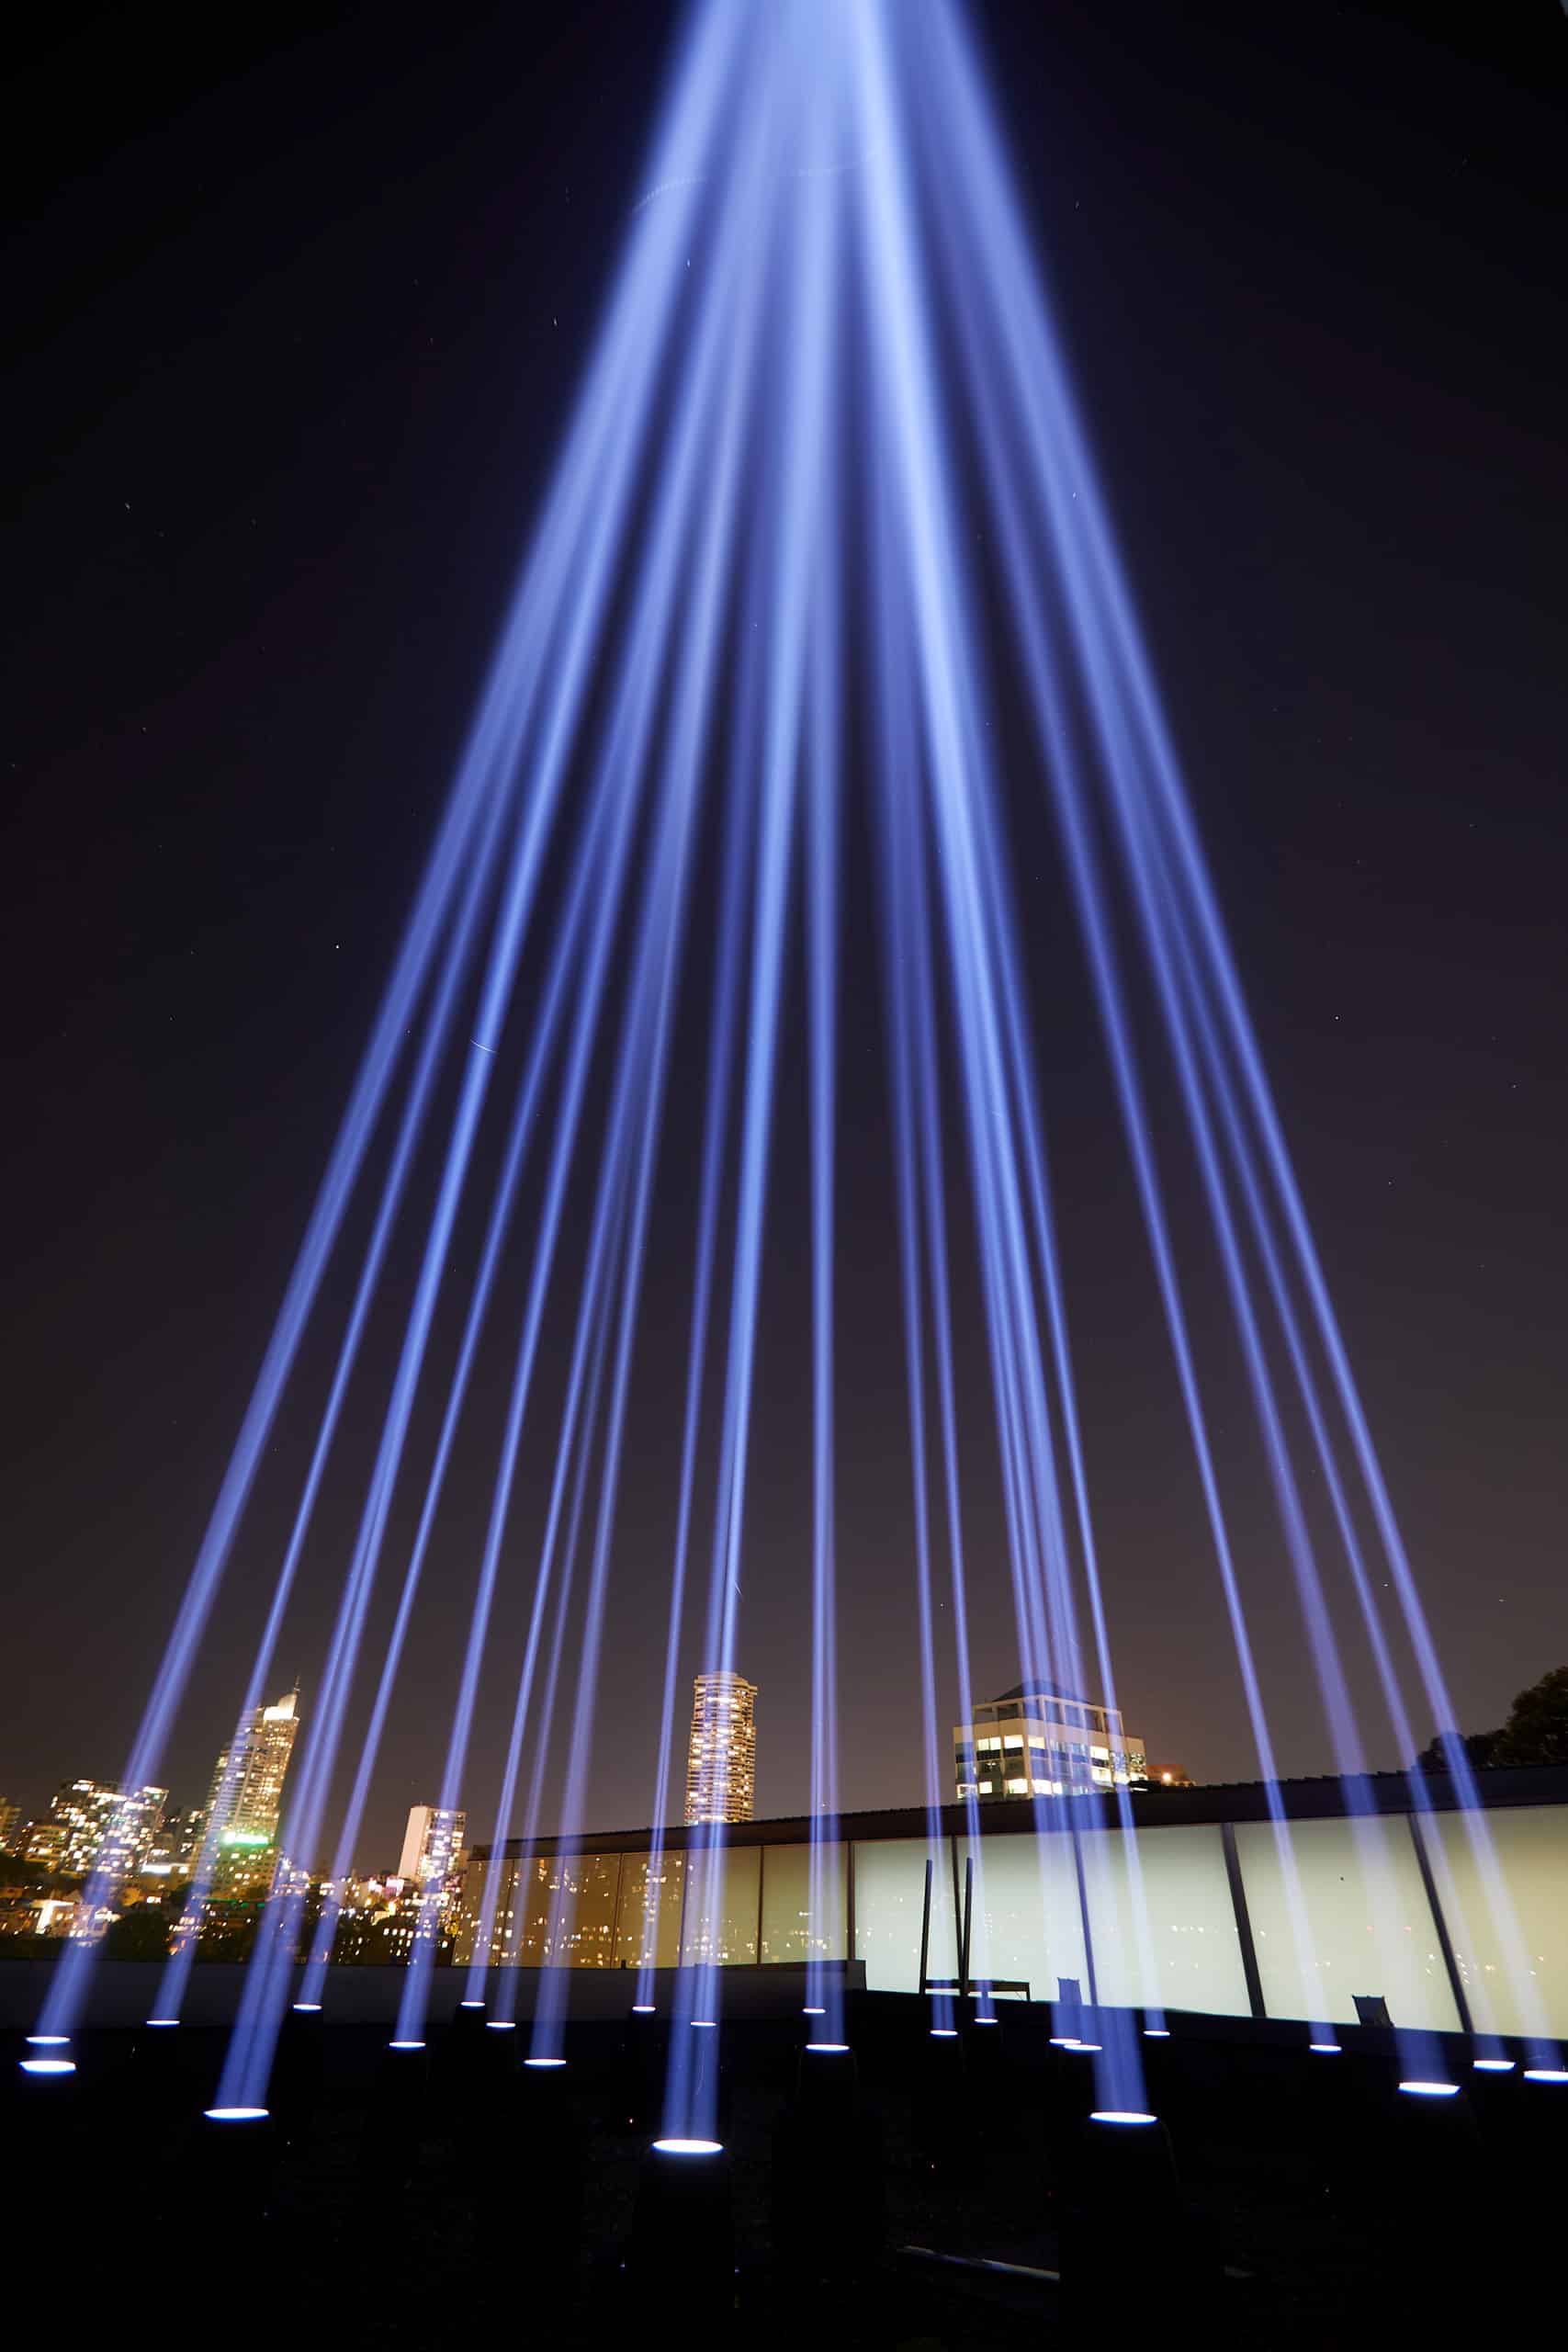 Beams of light are shooting down from the night sky against a background of well lit buildings.